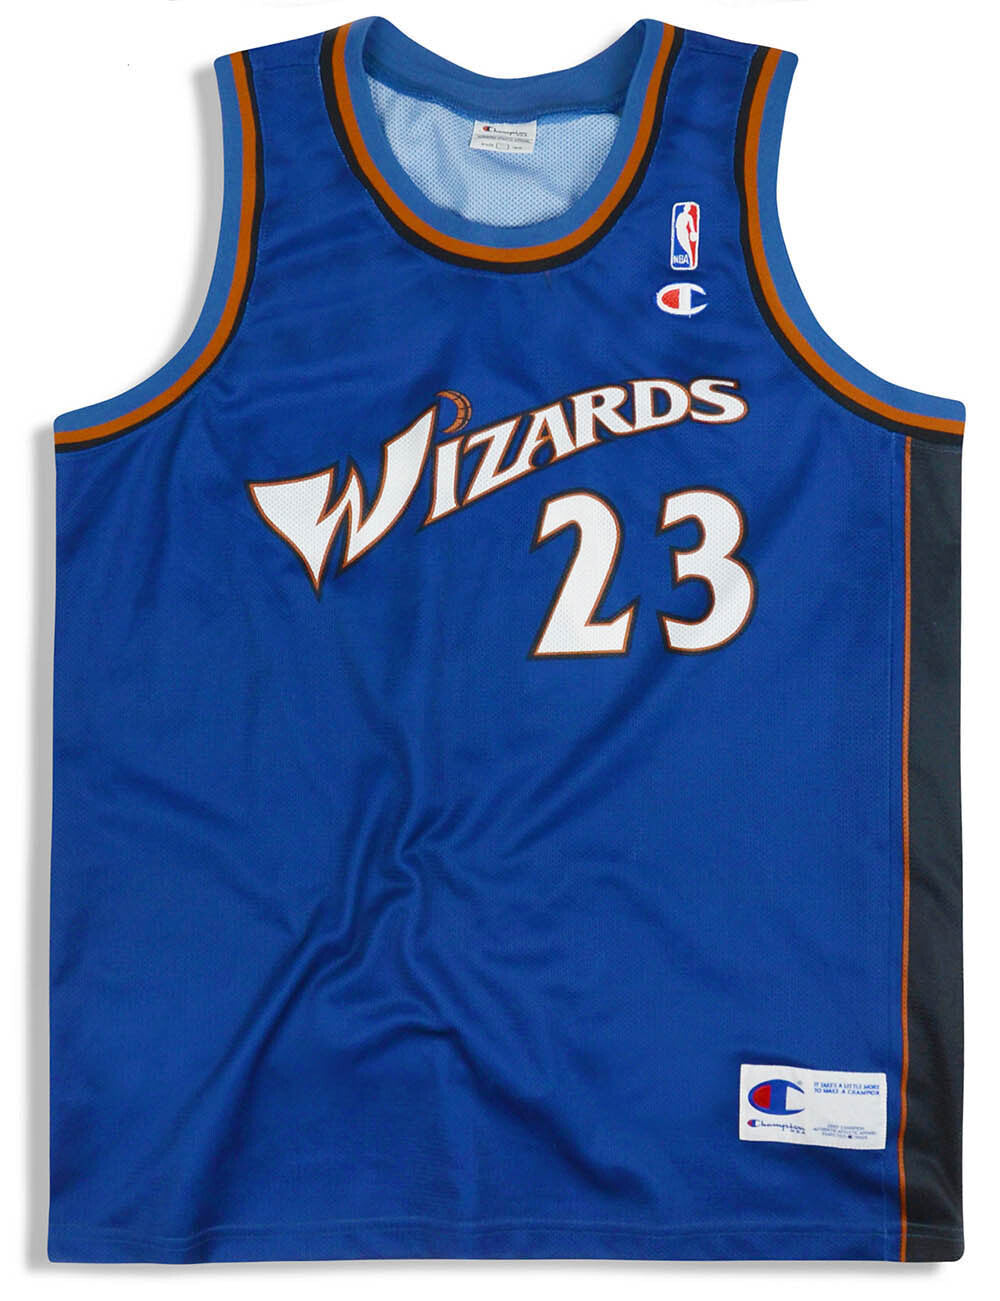 old wizards jerseys